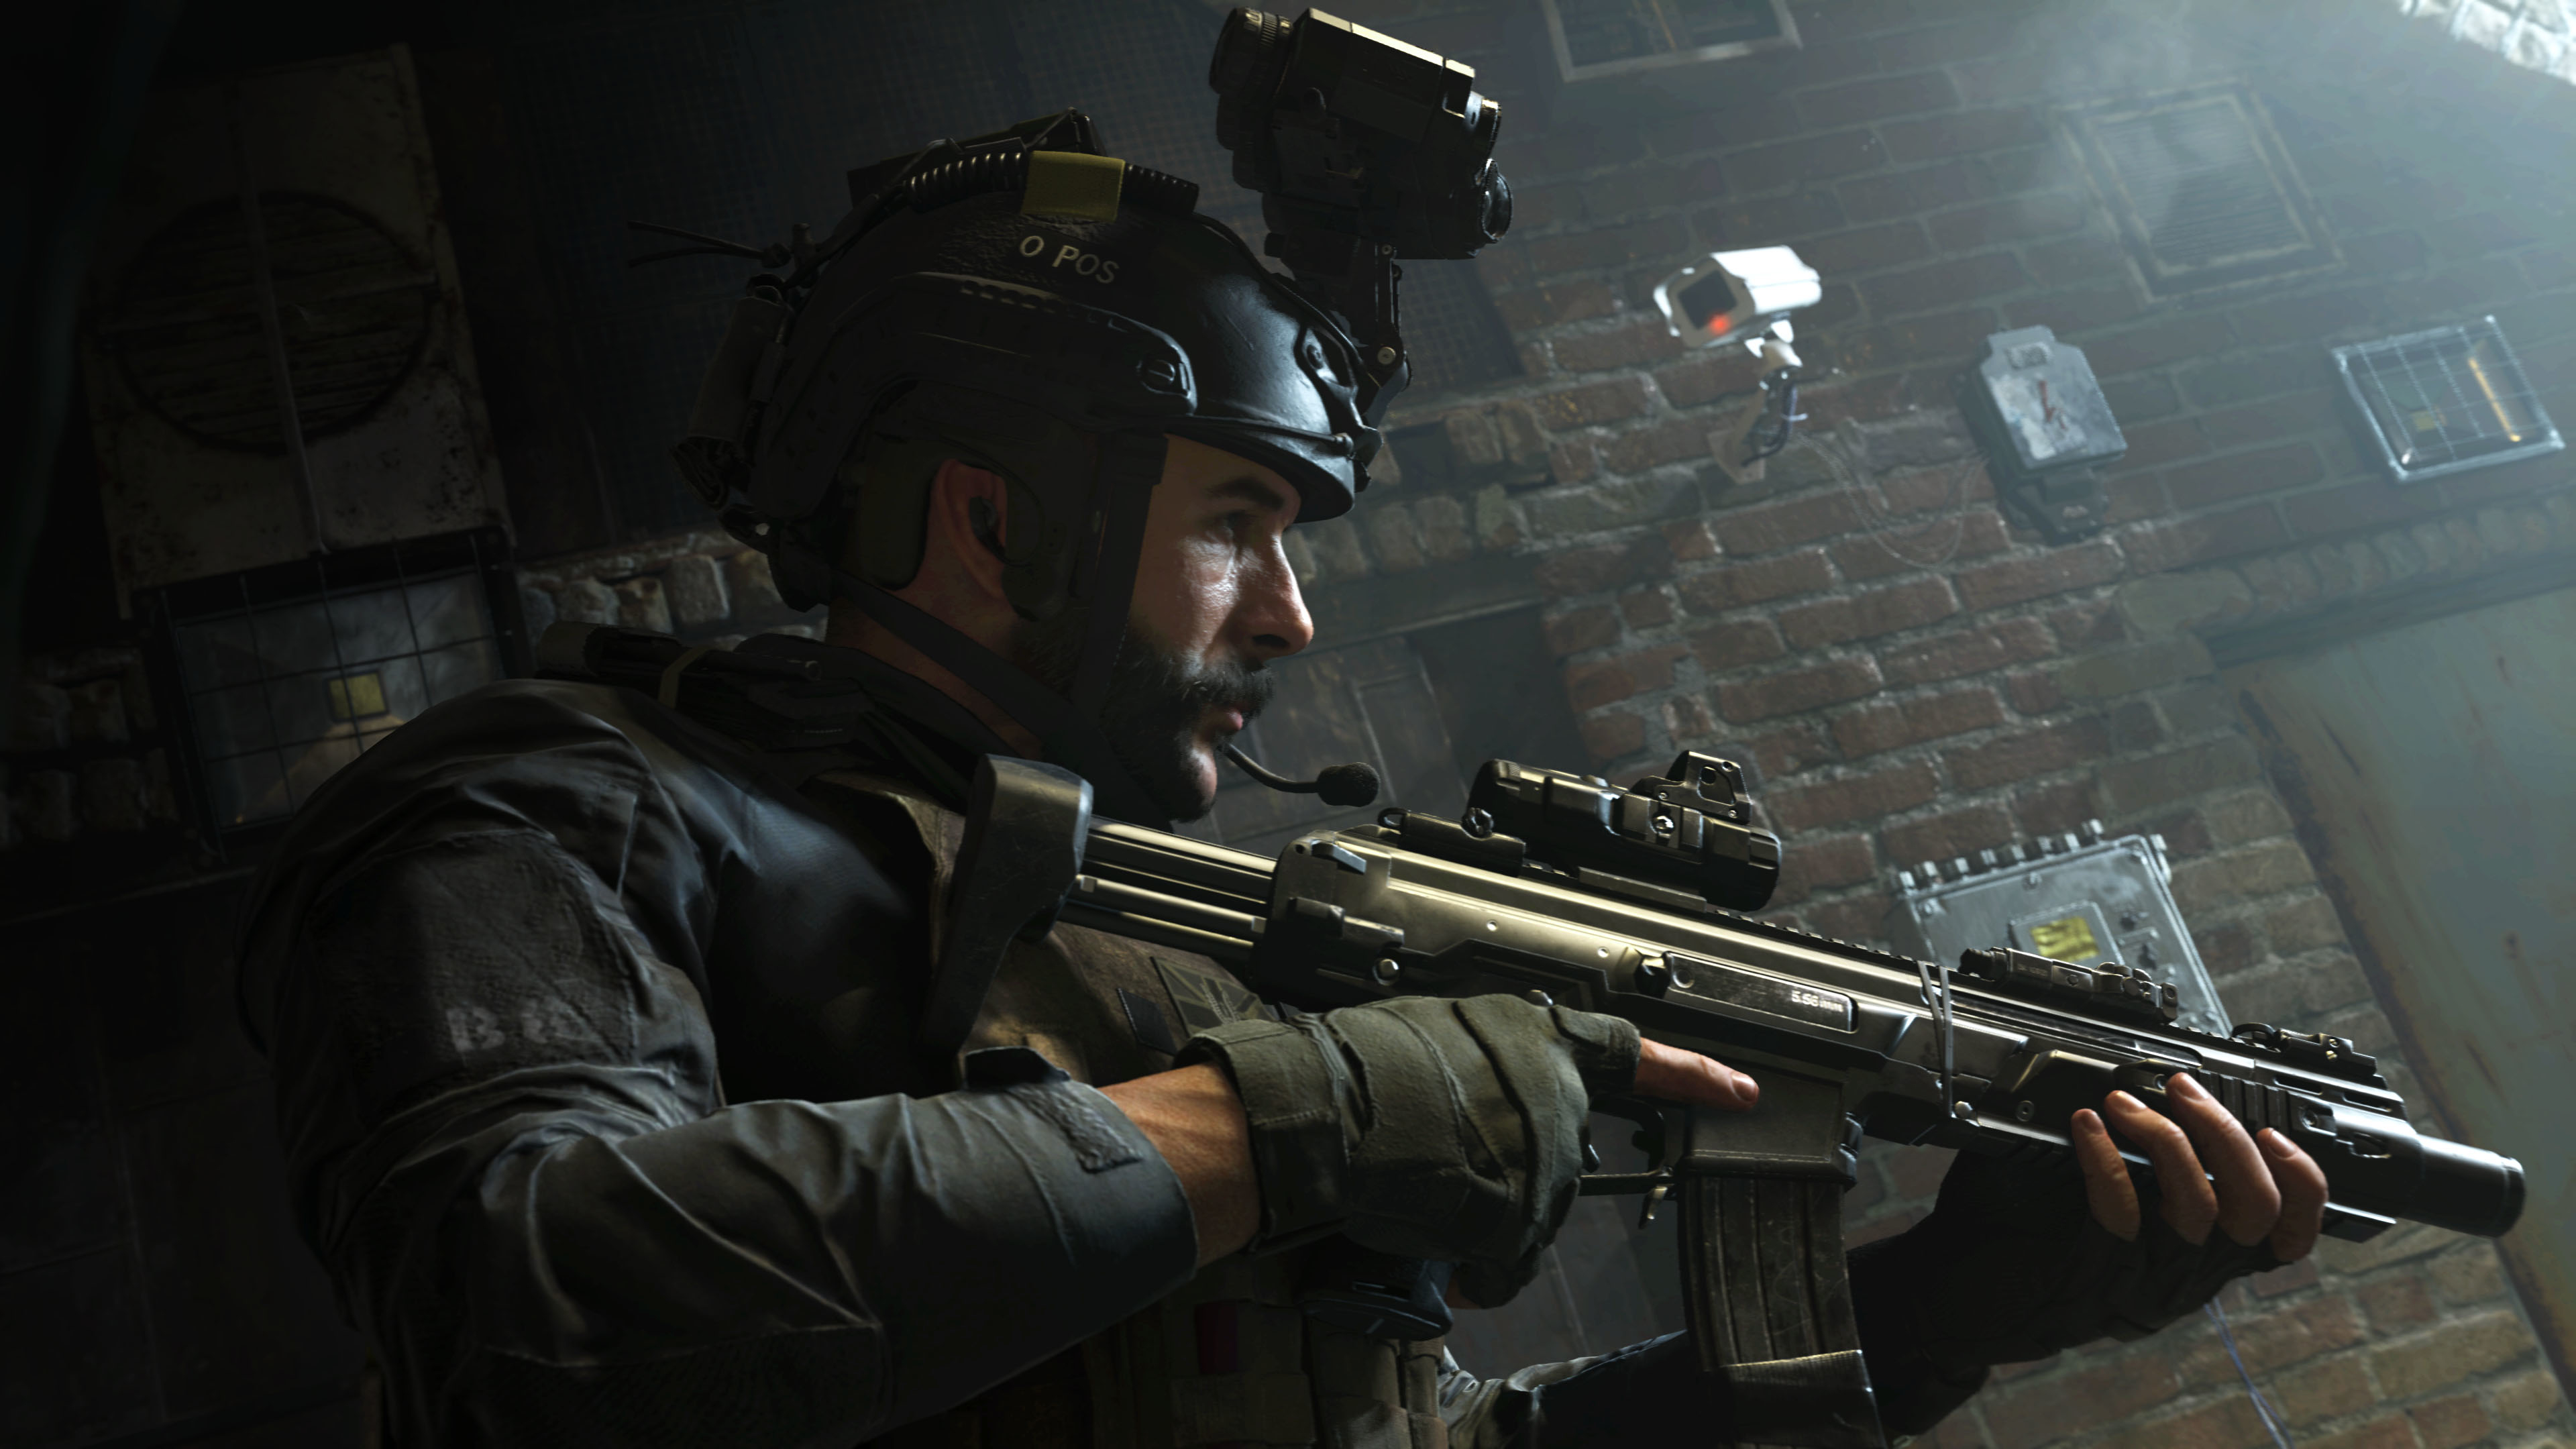 Call of Duty Modern Warfare Game 2019 Wallpaper, HD Games 4K Wallpaper, Image, Photo and Background